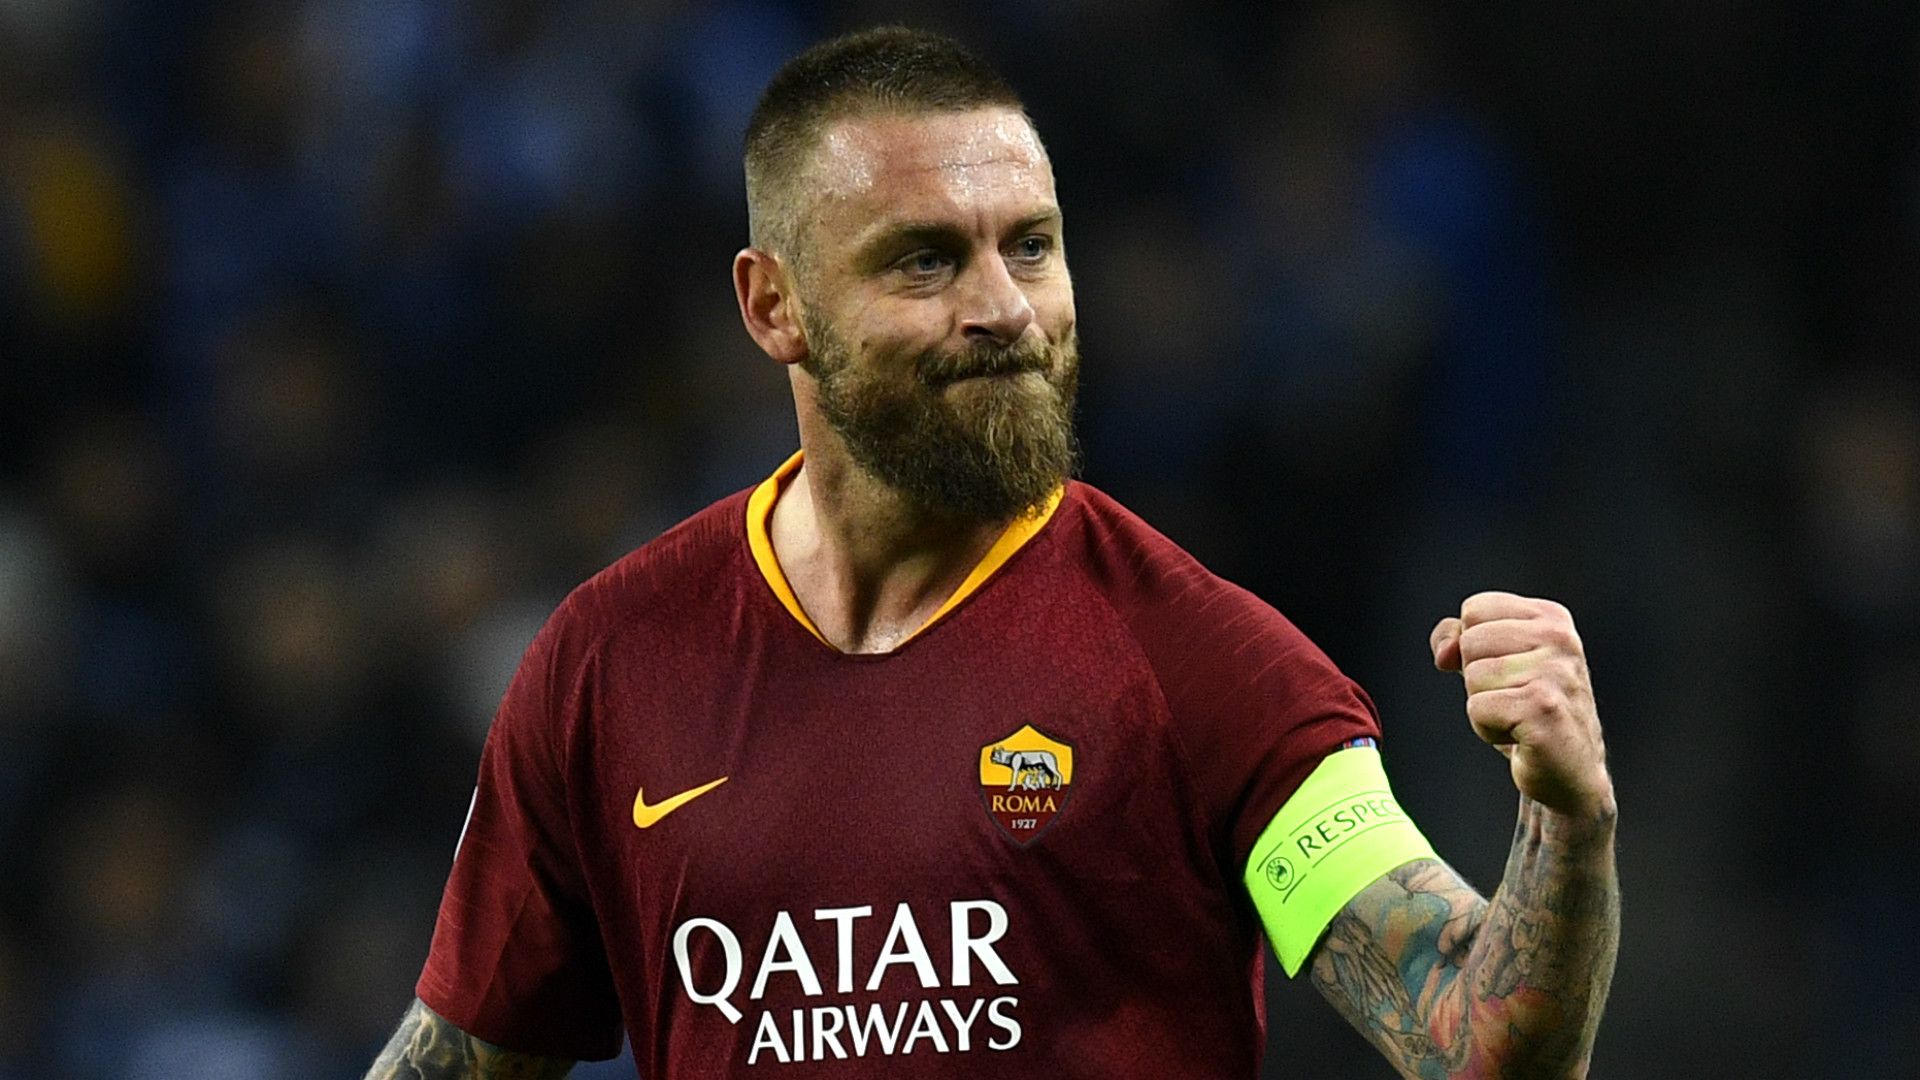 Daniele De Rossi News: World Cup Winner To Leave Roma After 18 Years But Will Not Be Retiring As A One Club Man